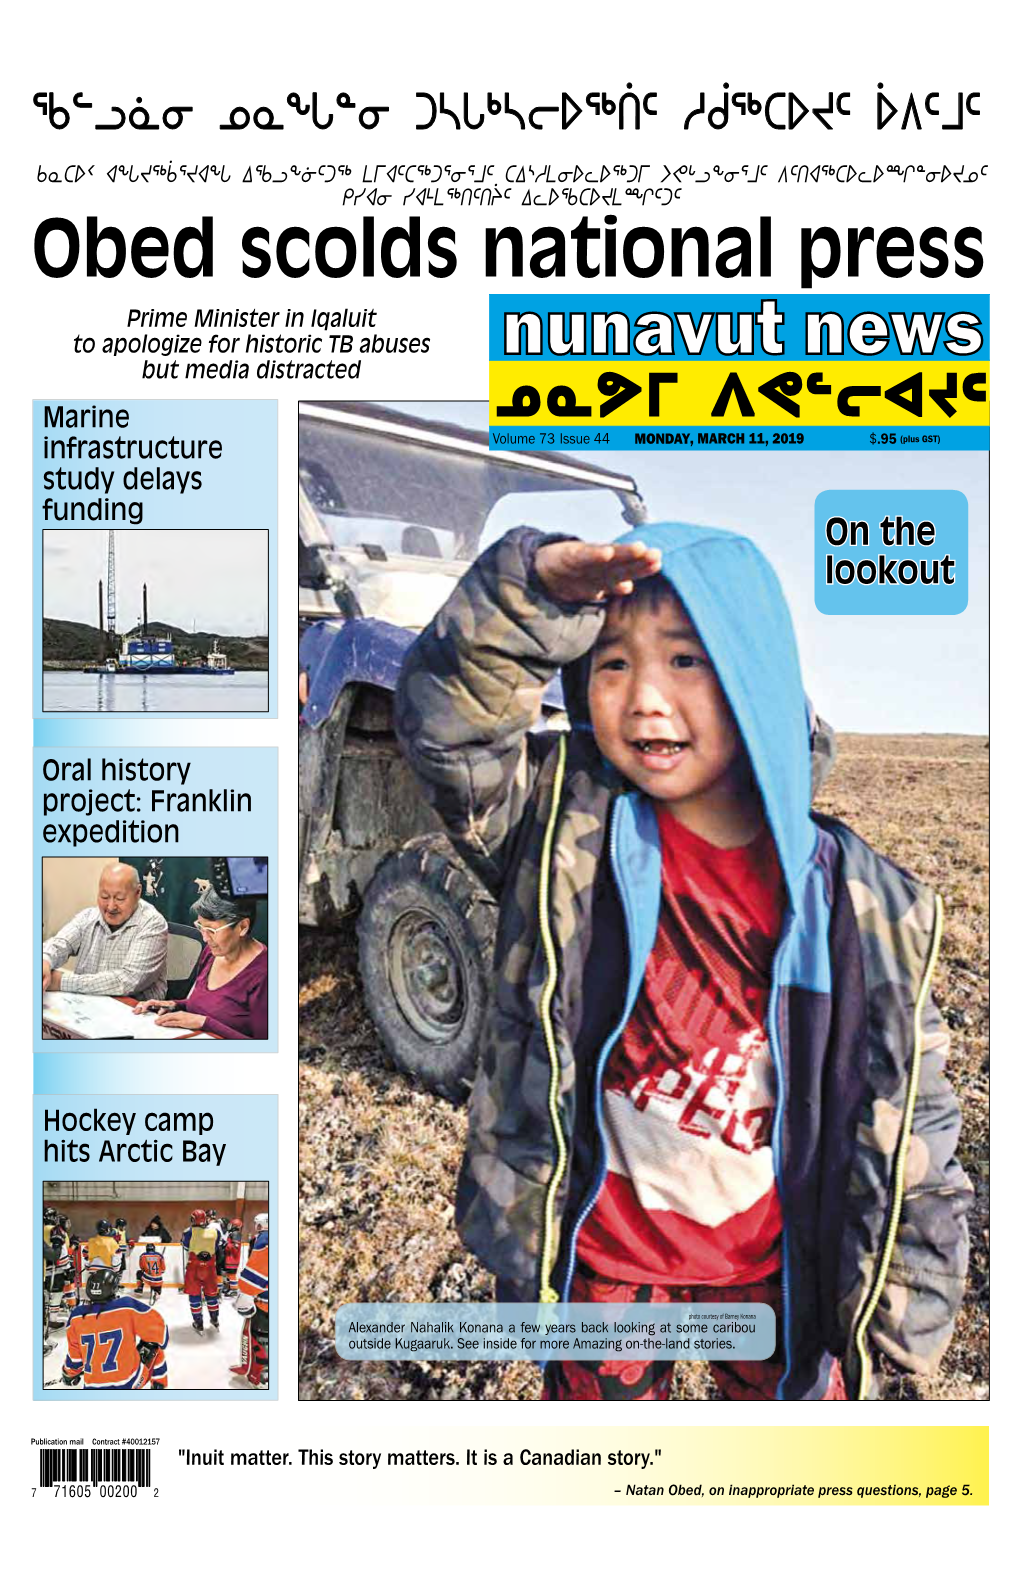 Nunavut News Is Committed to Getting Facts and Names ᐊᐃᓖᓐ ᑲᑎᐊᒃ ᓵᓚᒃᓴᖅᑐᖅ: ᓵᓐᑐᕋ ᓴᕕᐊᕐᔪᒃ Right